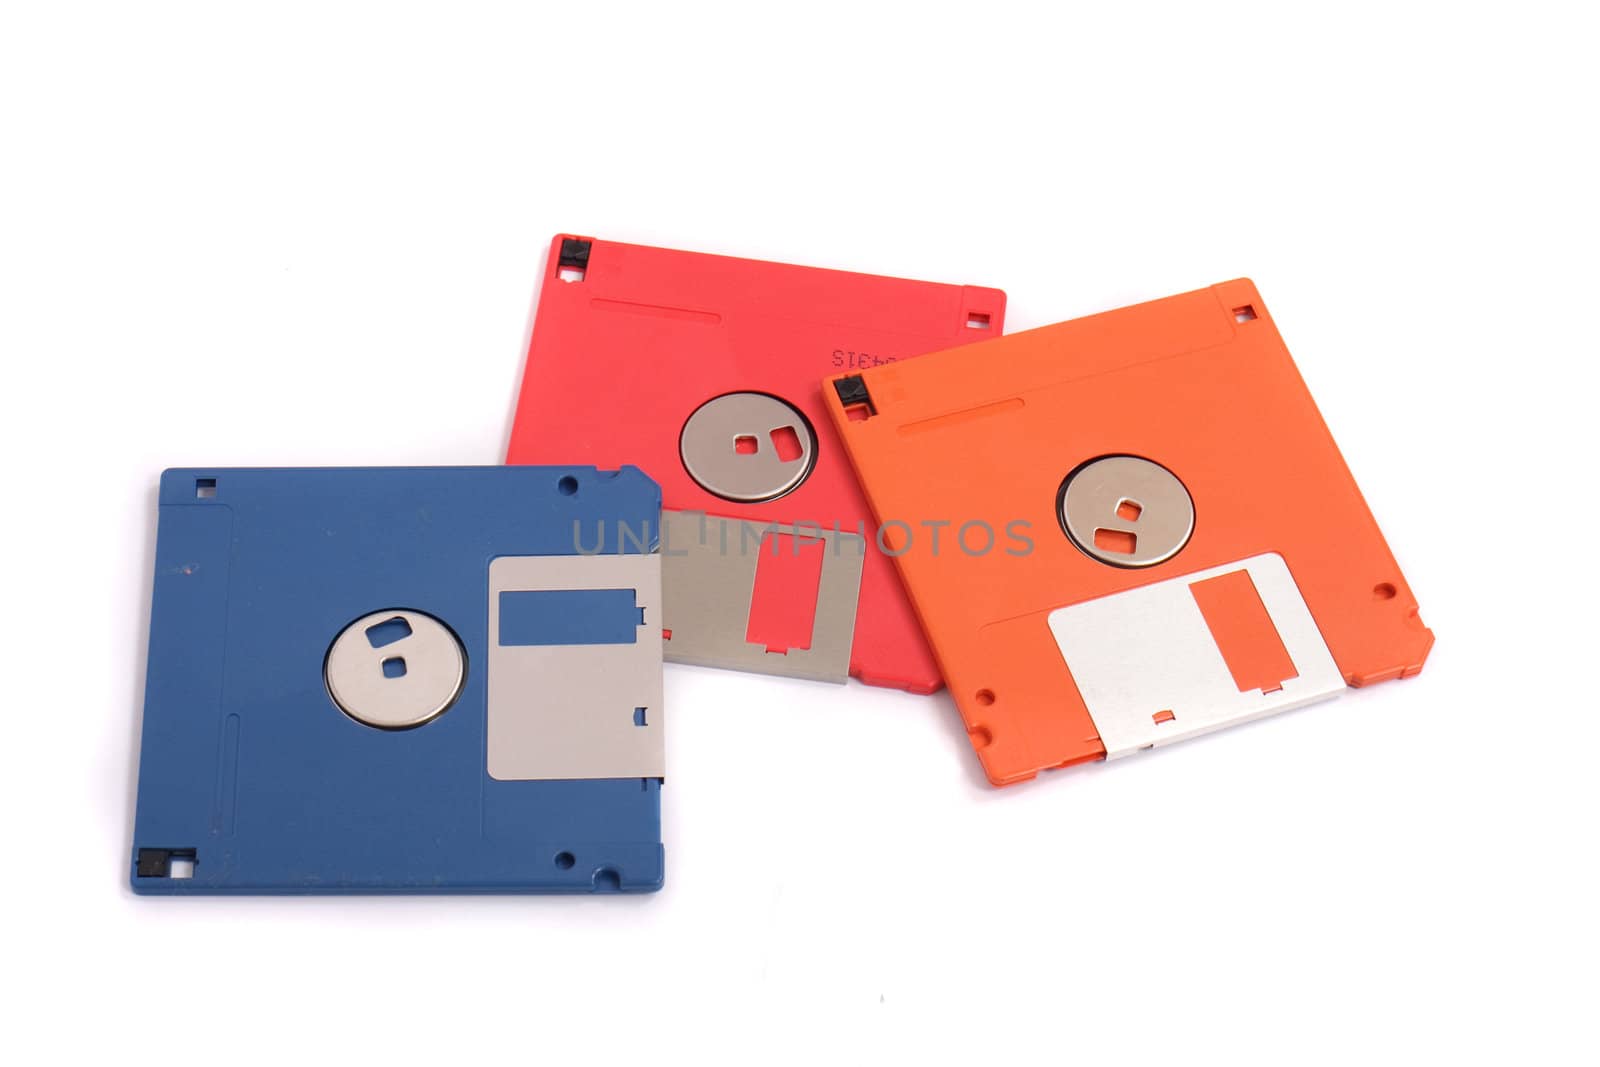 color floppy disks on the white background